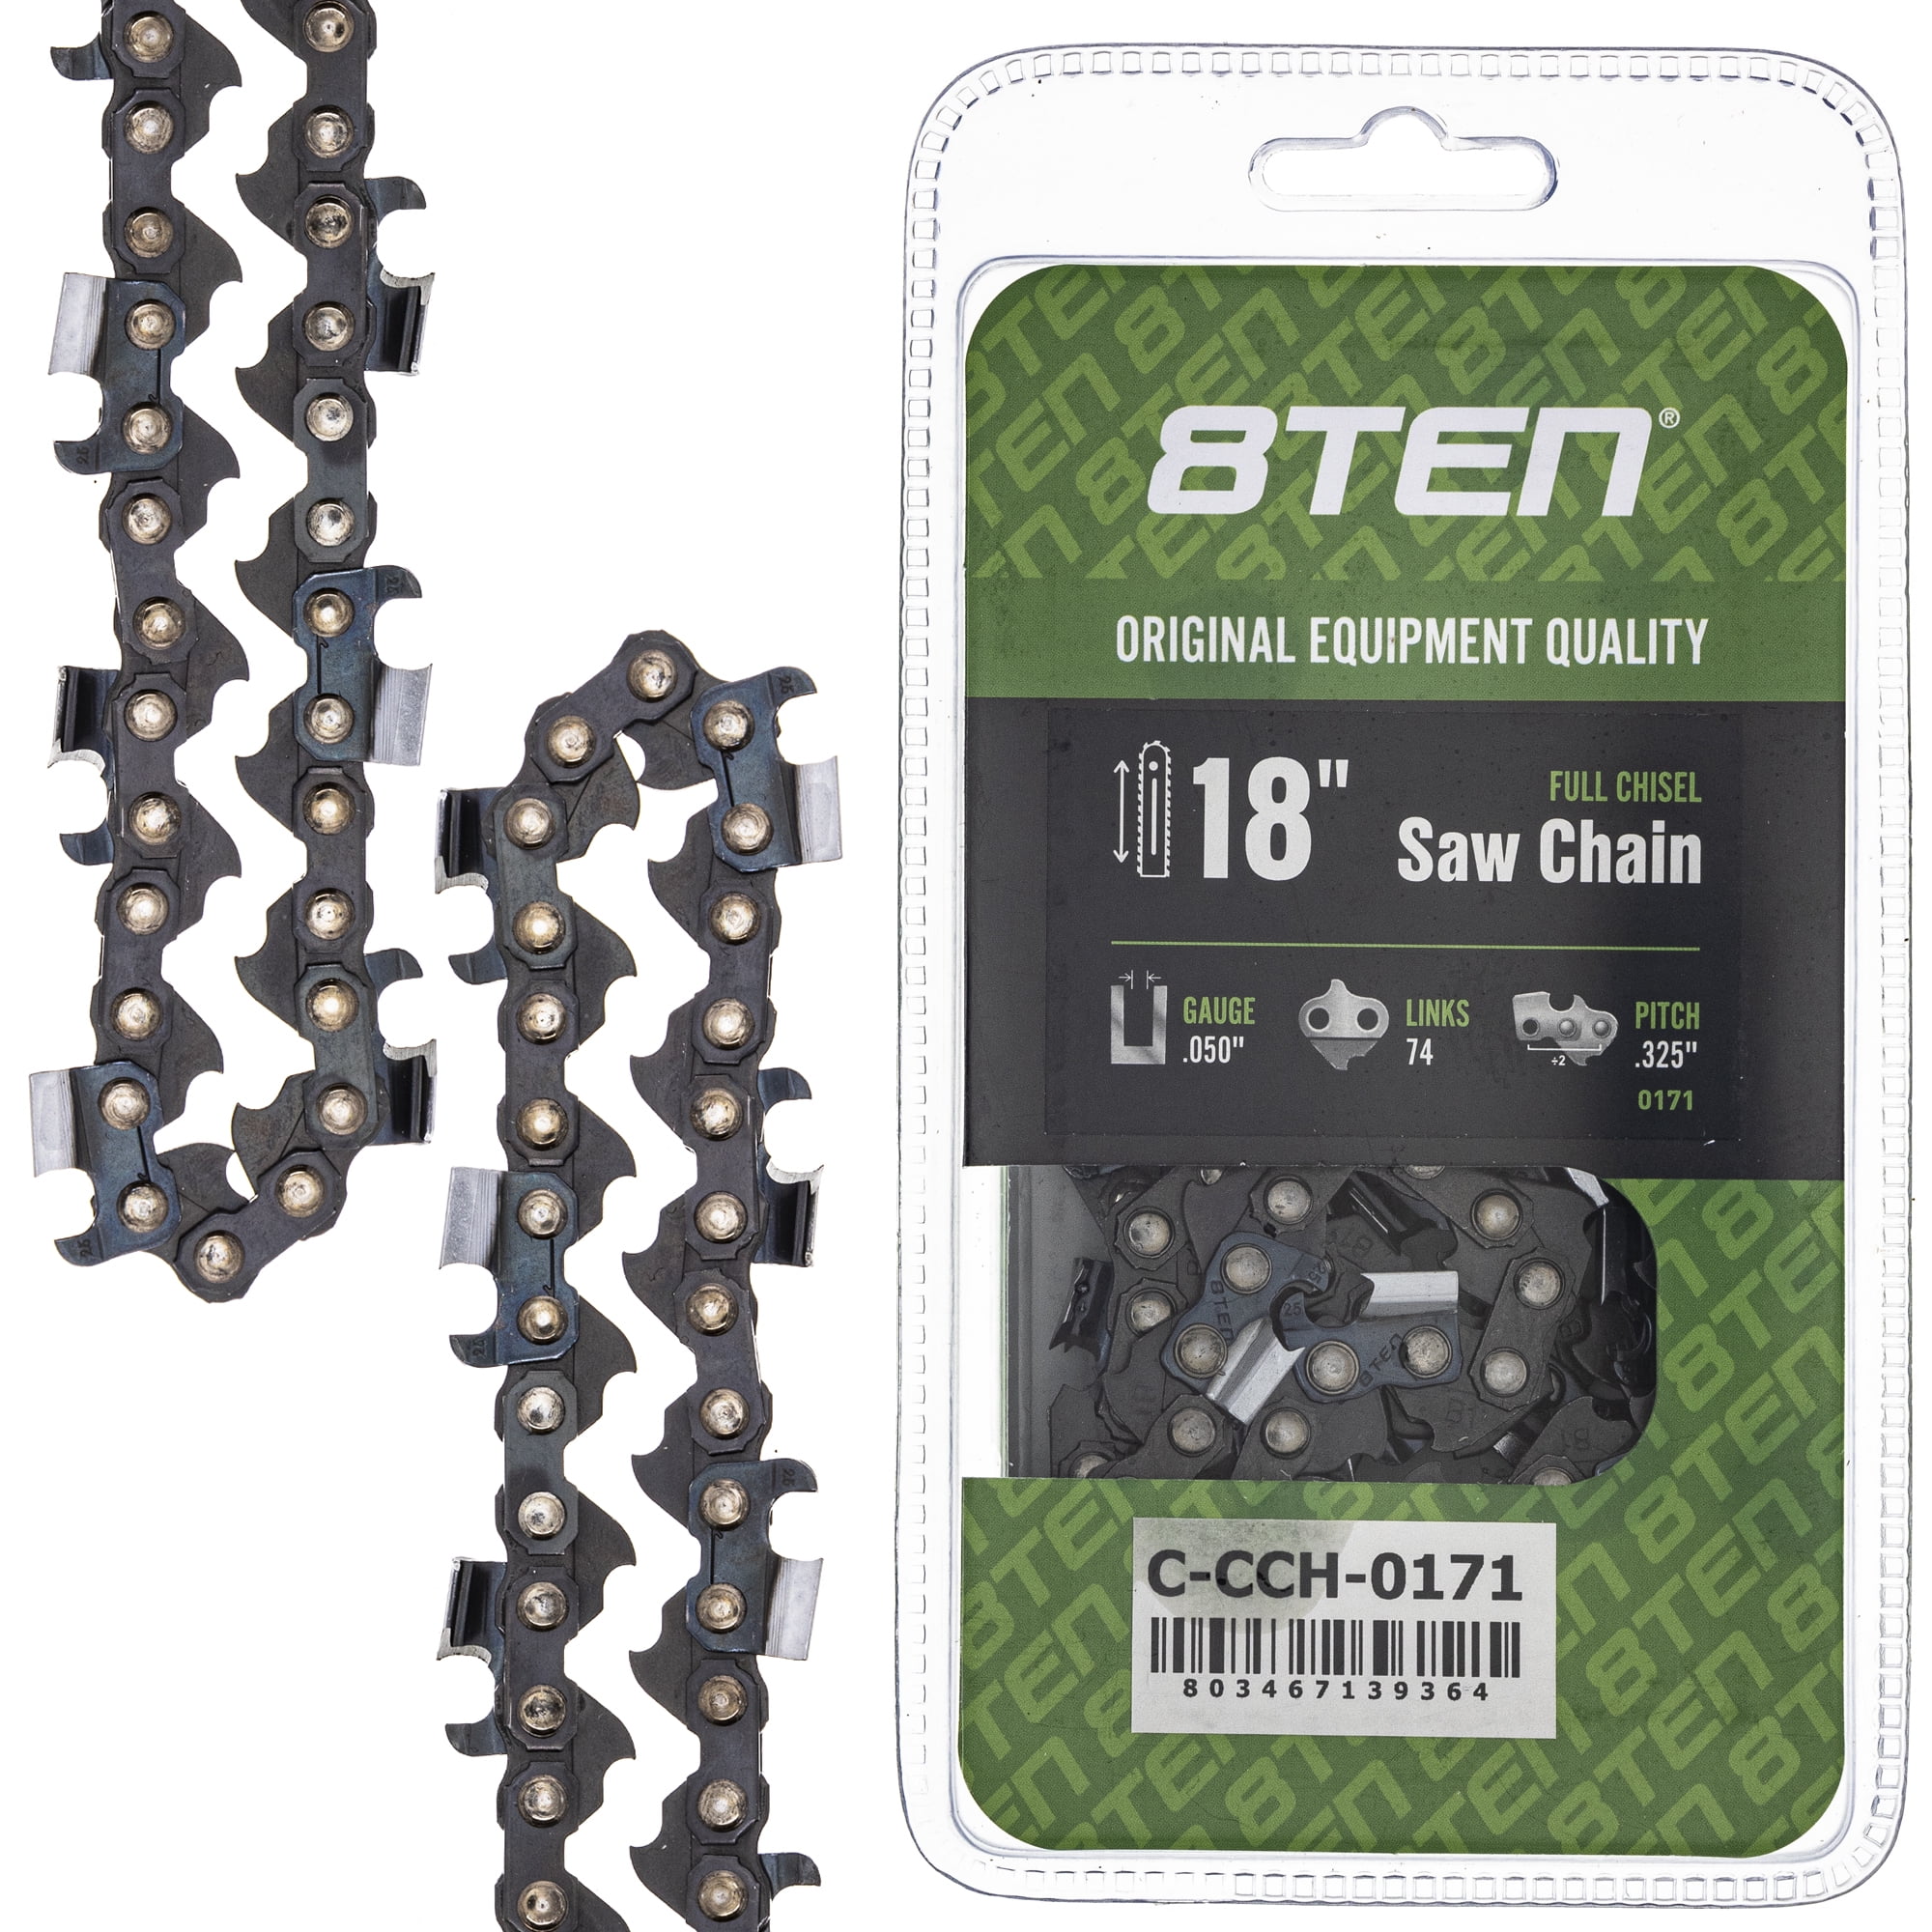 STIHL .325 Pitch Sawchain 74 Drivers .050 Guage Chisel Saw Chain for 18 Inch Bar for sale online 